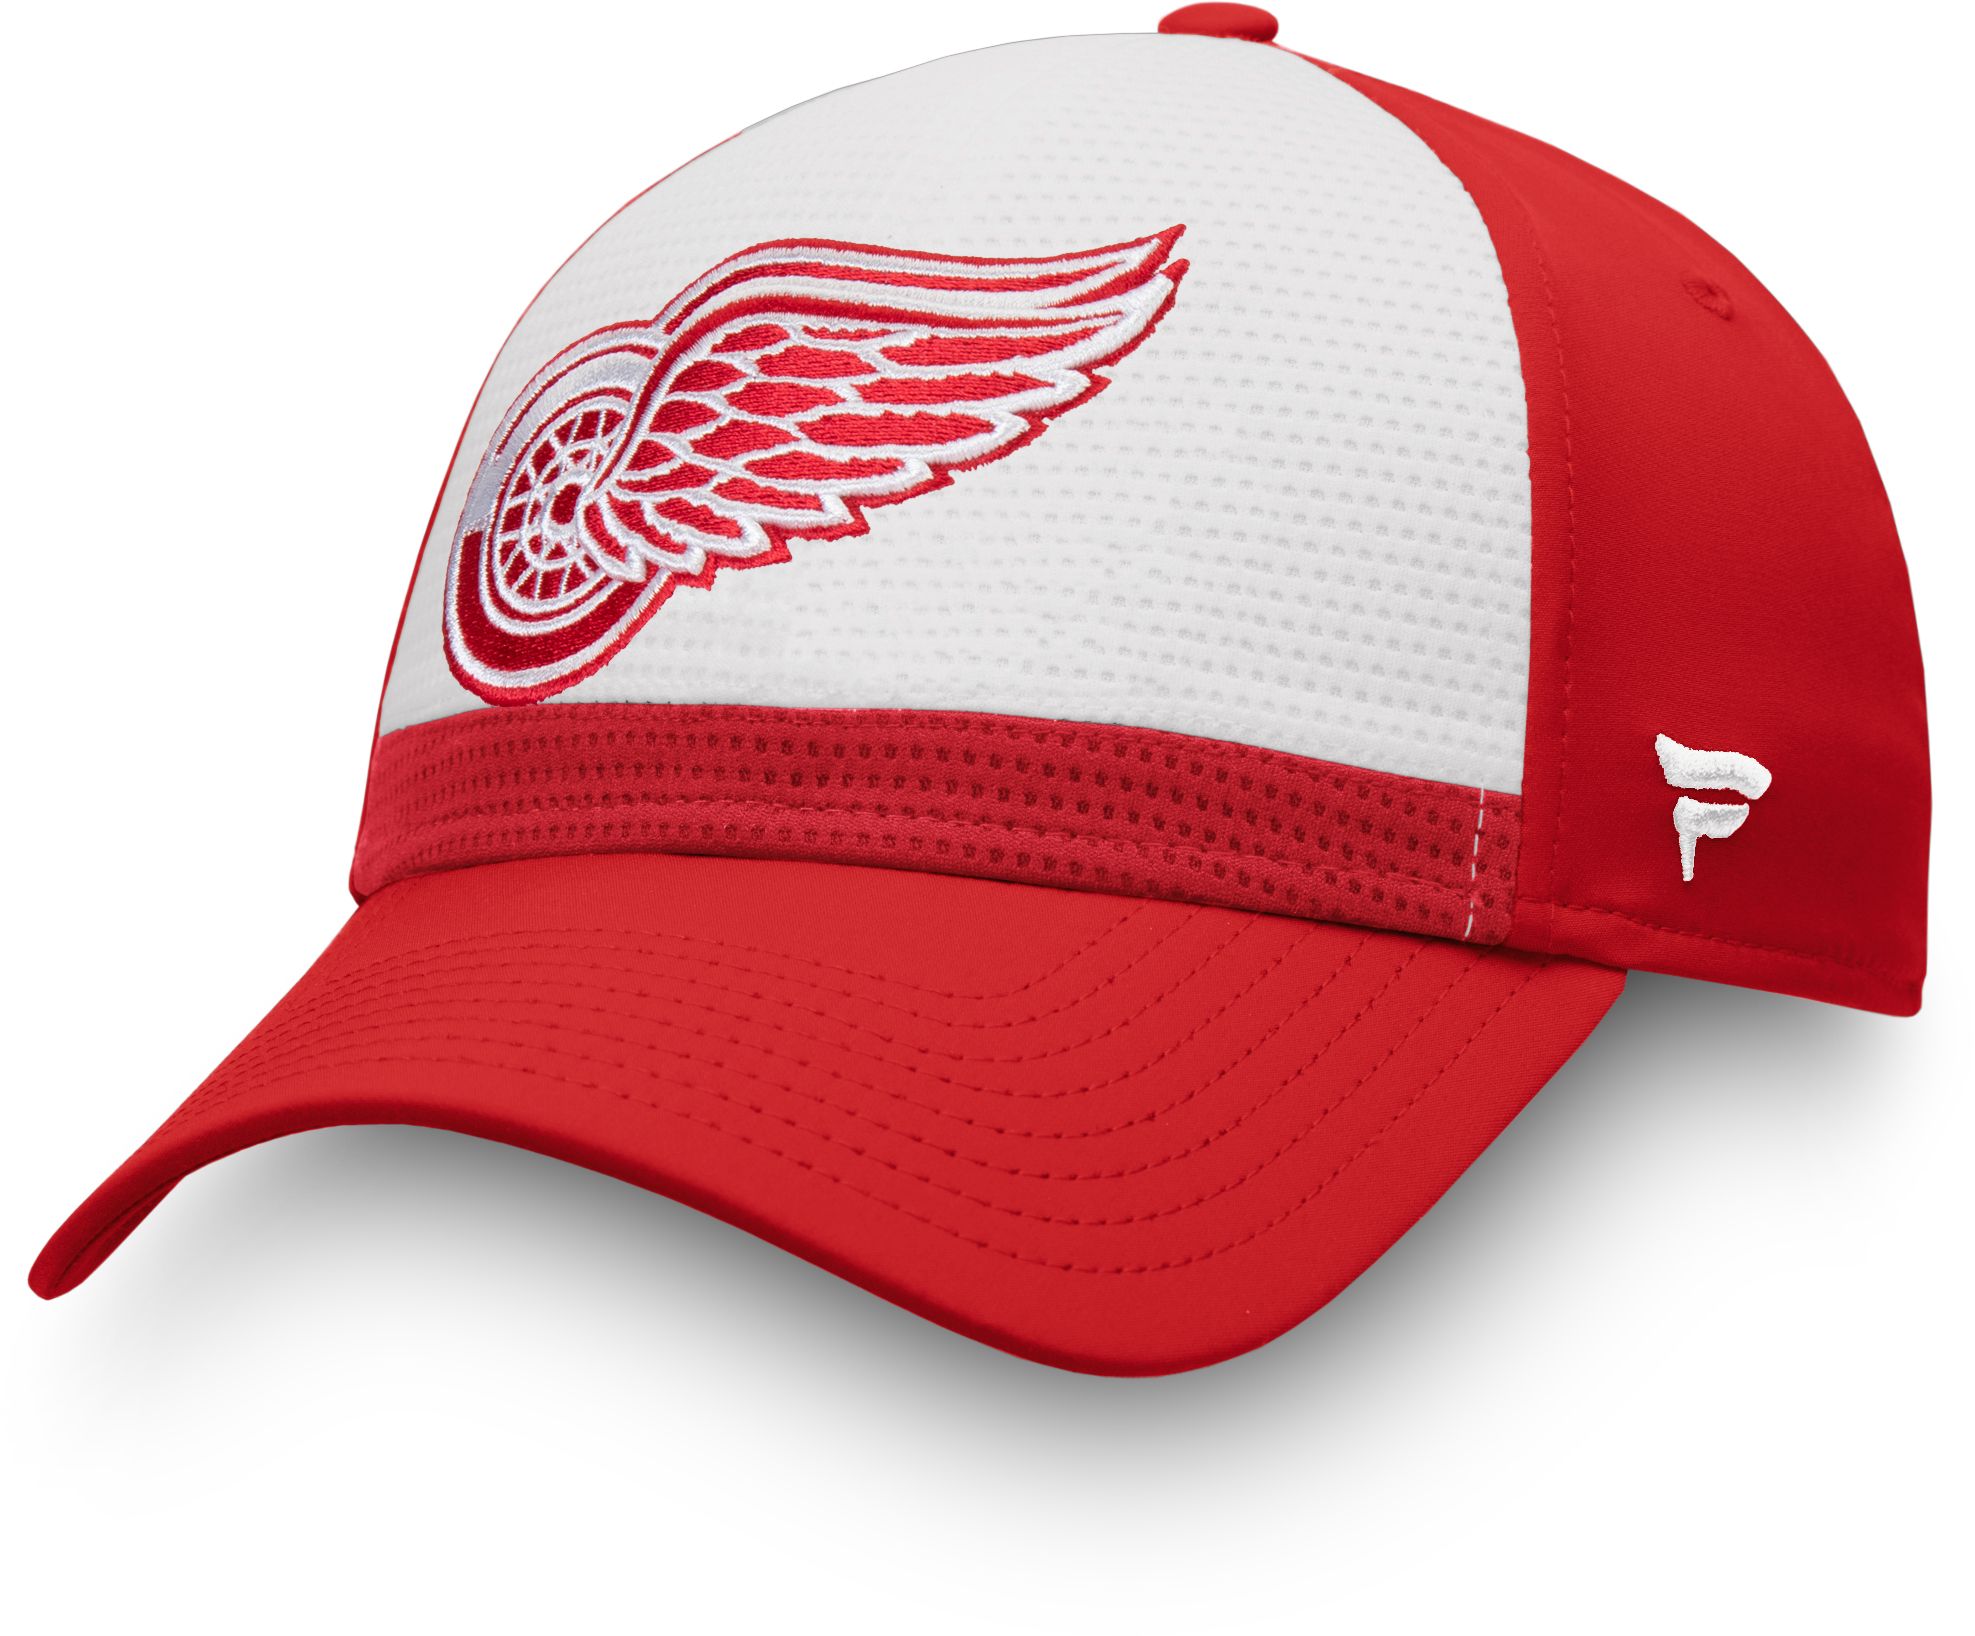 nhl red wings hat